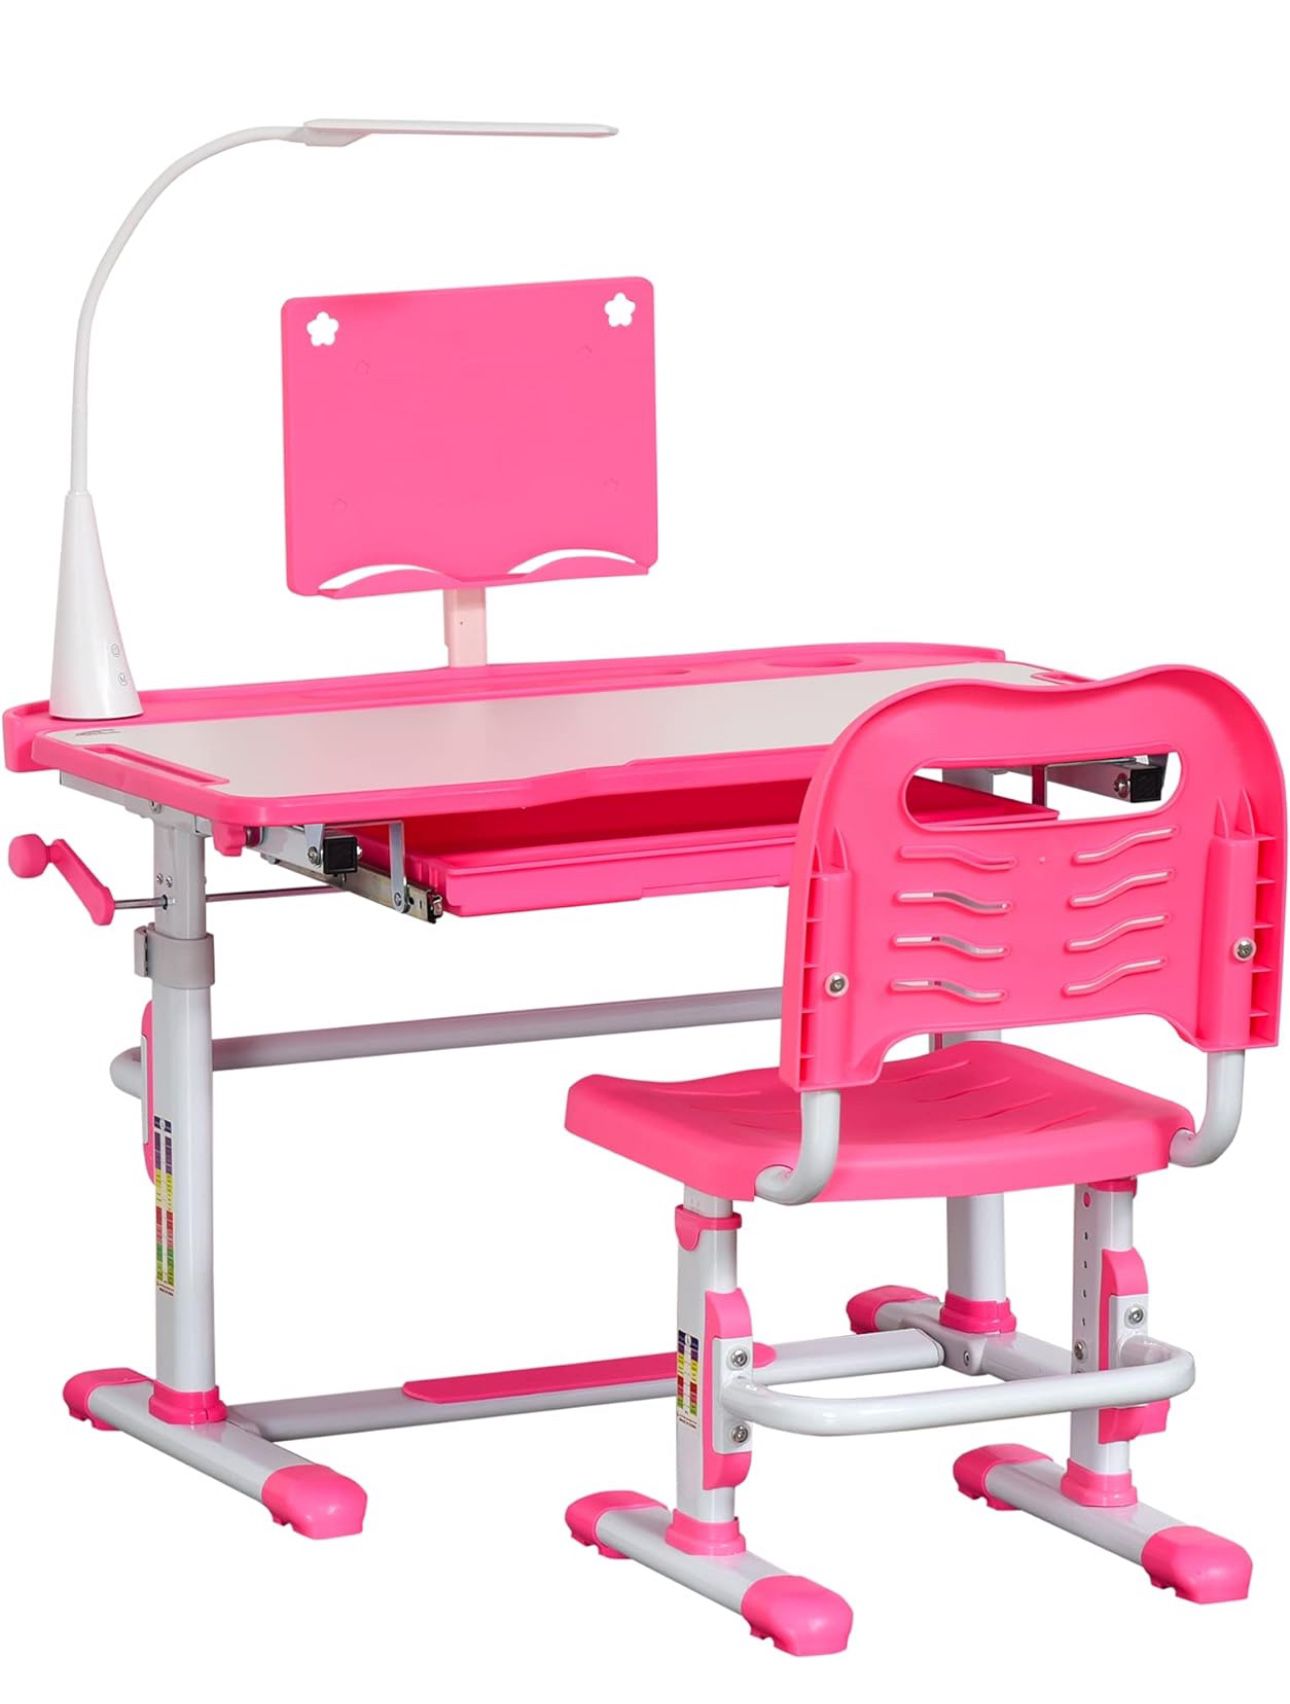 Kids Desk and Chair Set, Height Adjustable School Study Table and Chair, Student Writing Desk with Tilt Desktop, LED Light, Pen Box, Drawer, Reading B